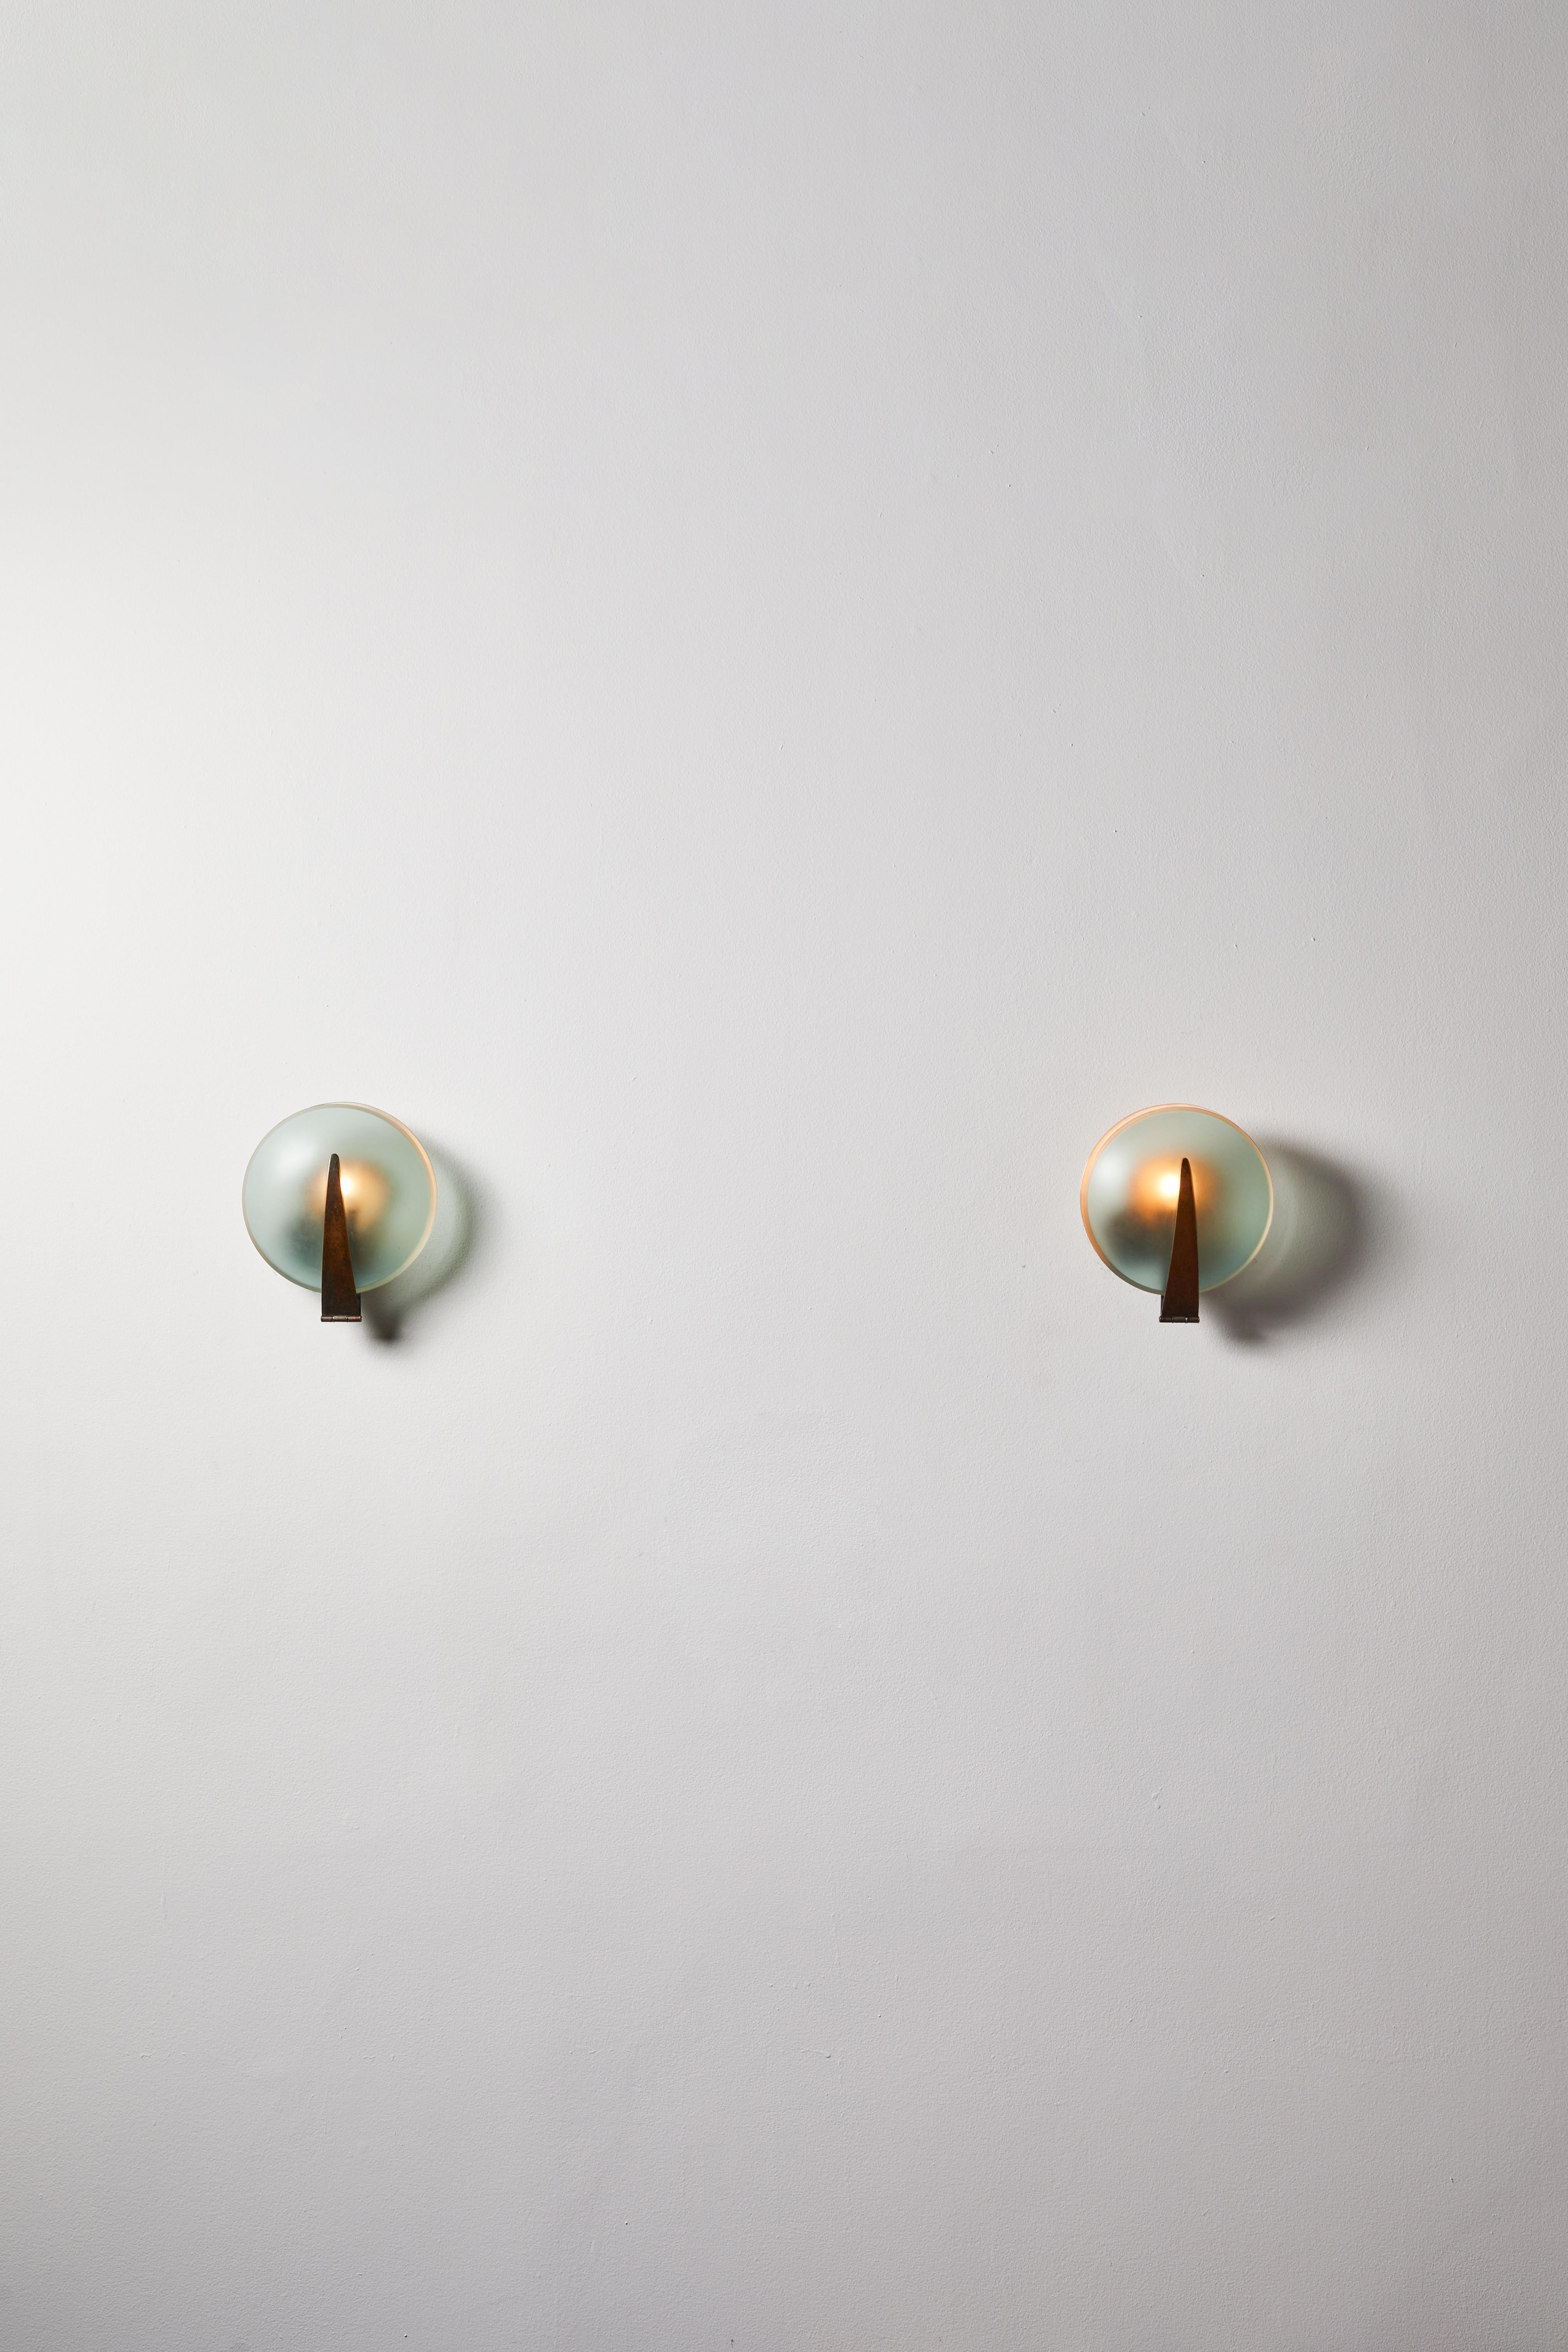 Rare Pair of Sconces by Max Ingrand for Fontana Arte. Designed and manufactured in Italy, 1960. Colored, sandblasted glass, brass. Rewired for U.S. standards. We recommend one E26 60w maximum bulbs. Bulbs provided as a one time courtesy. Literature: